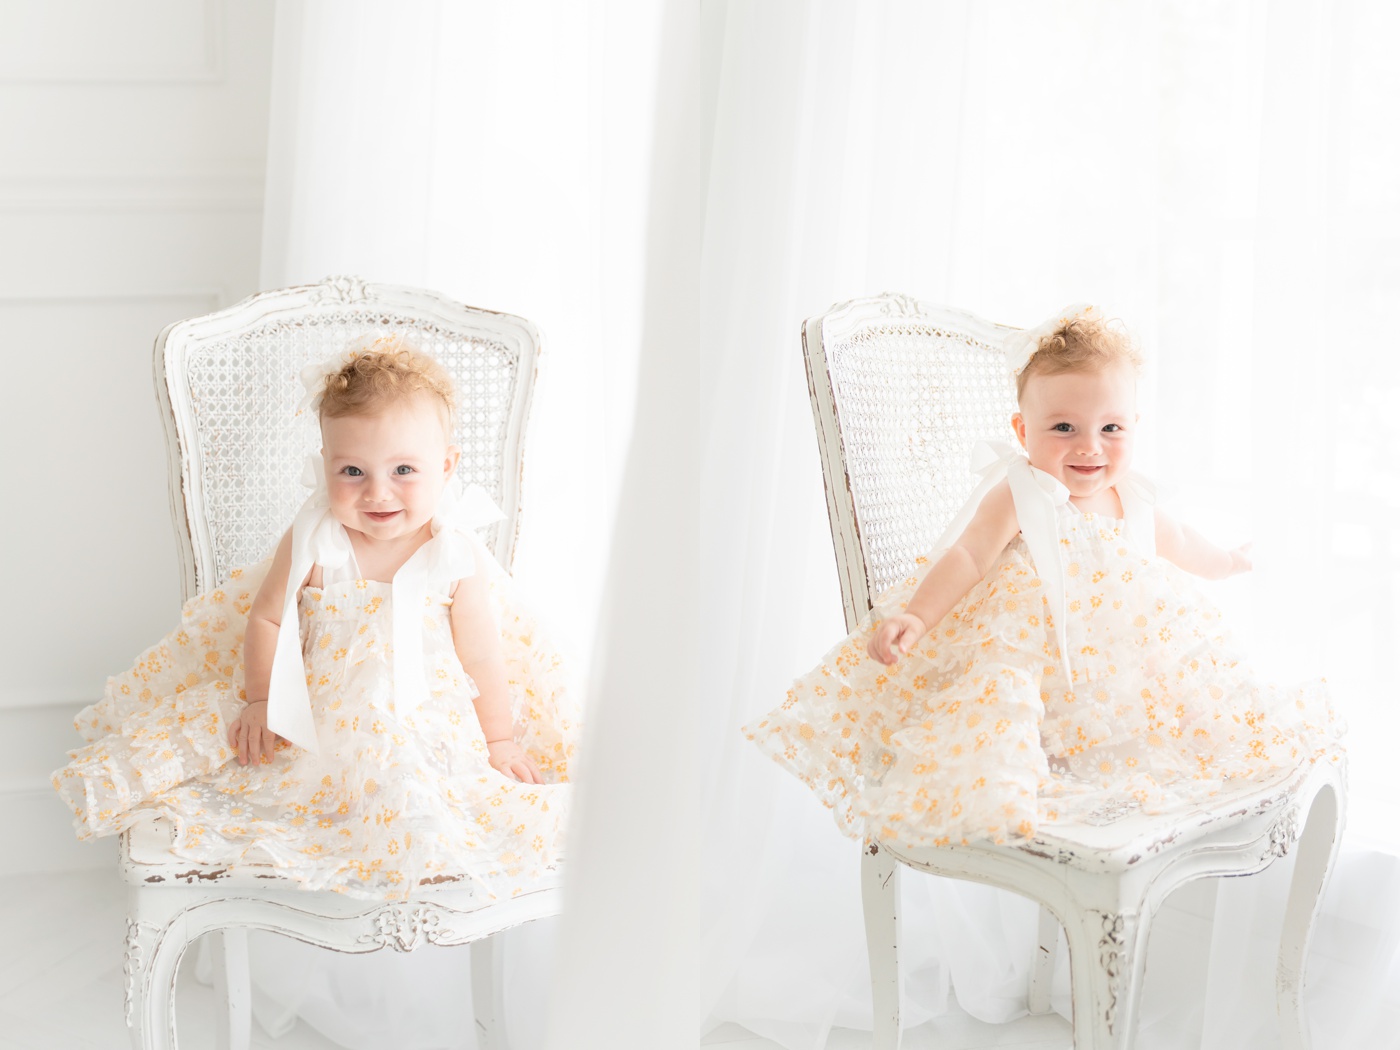 Baby girl sitting on an antique white chair in a white fluffy dress with yellow daisies